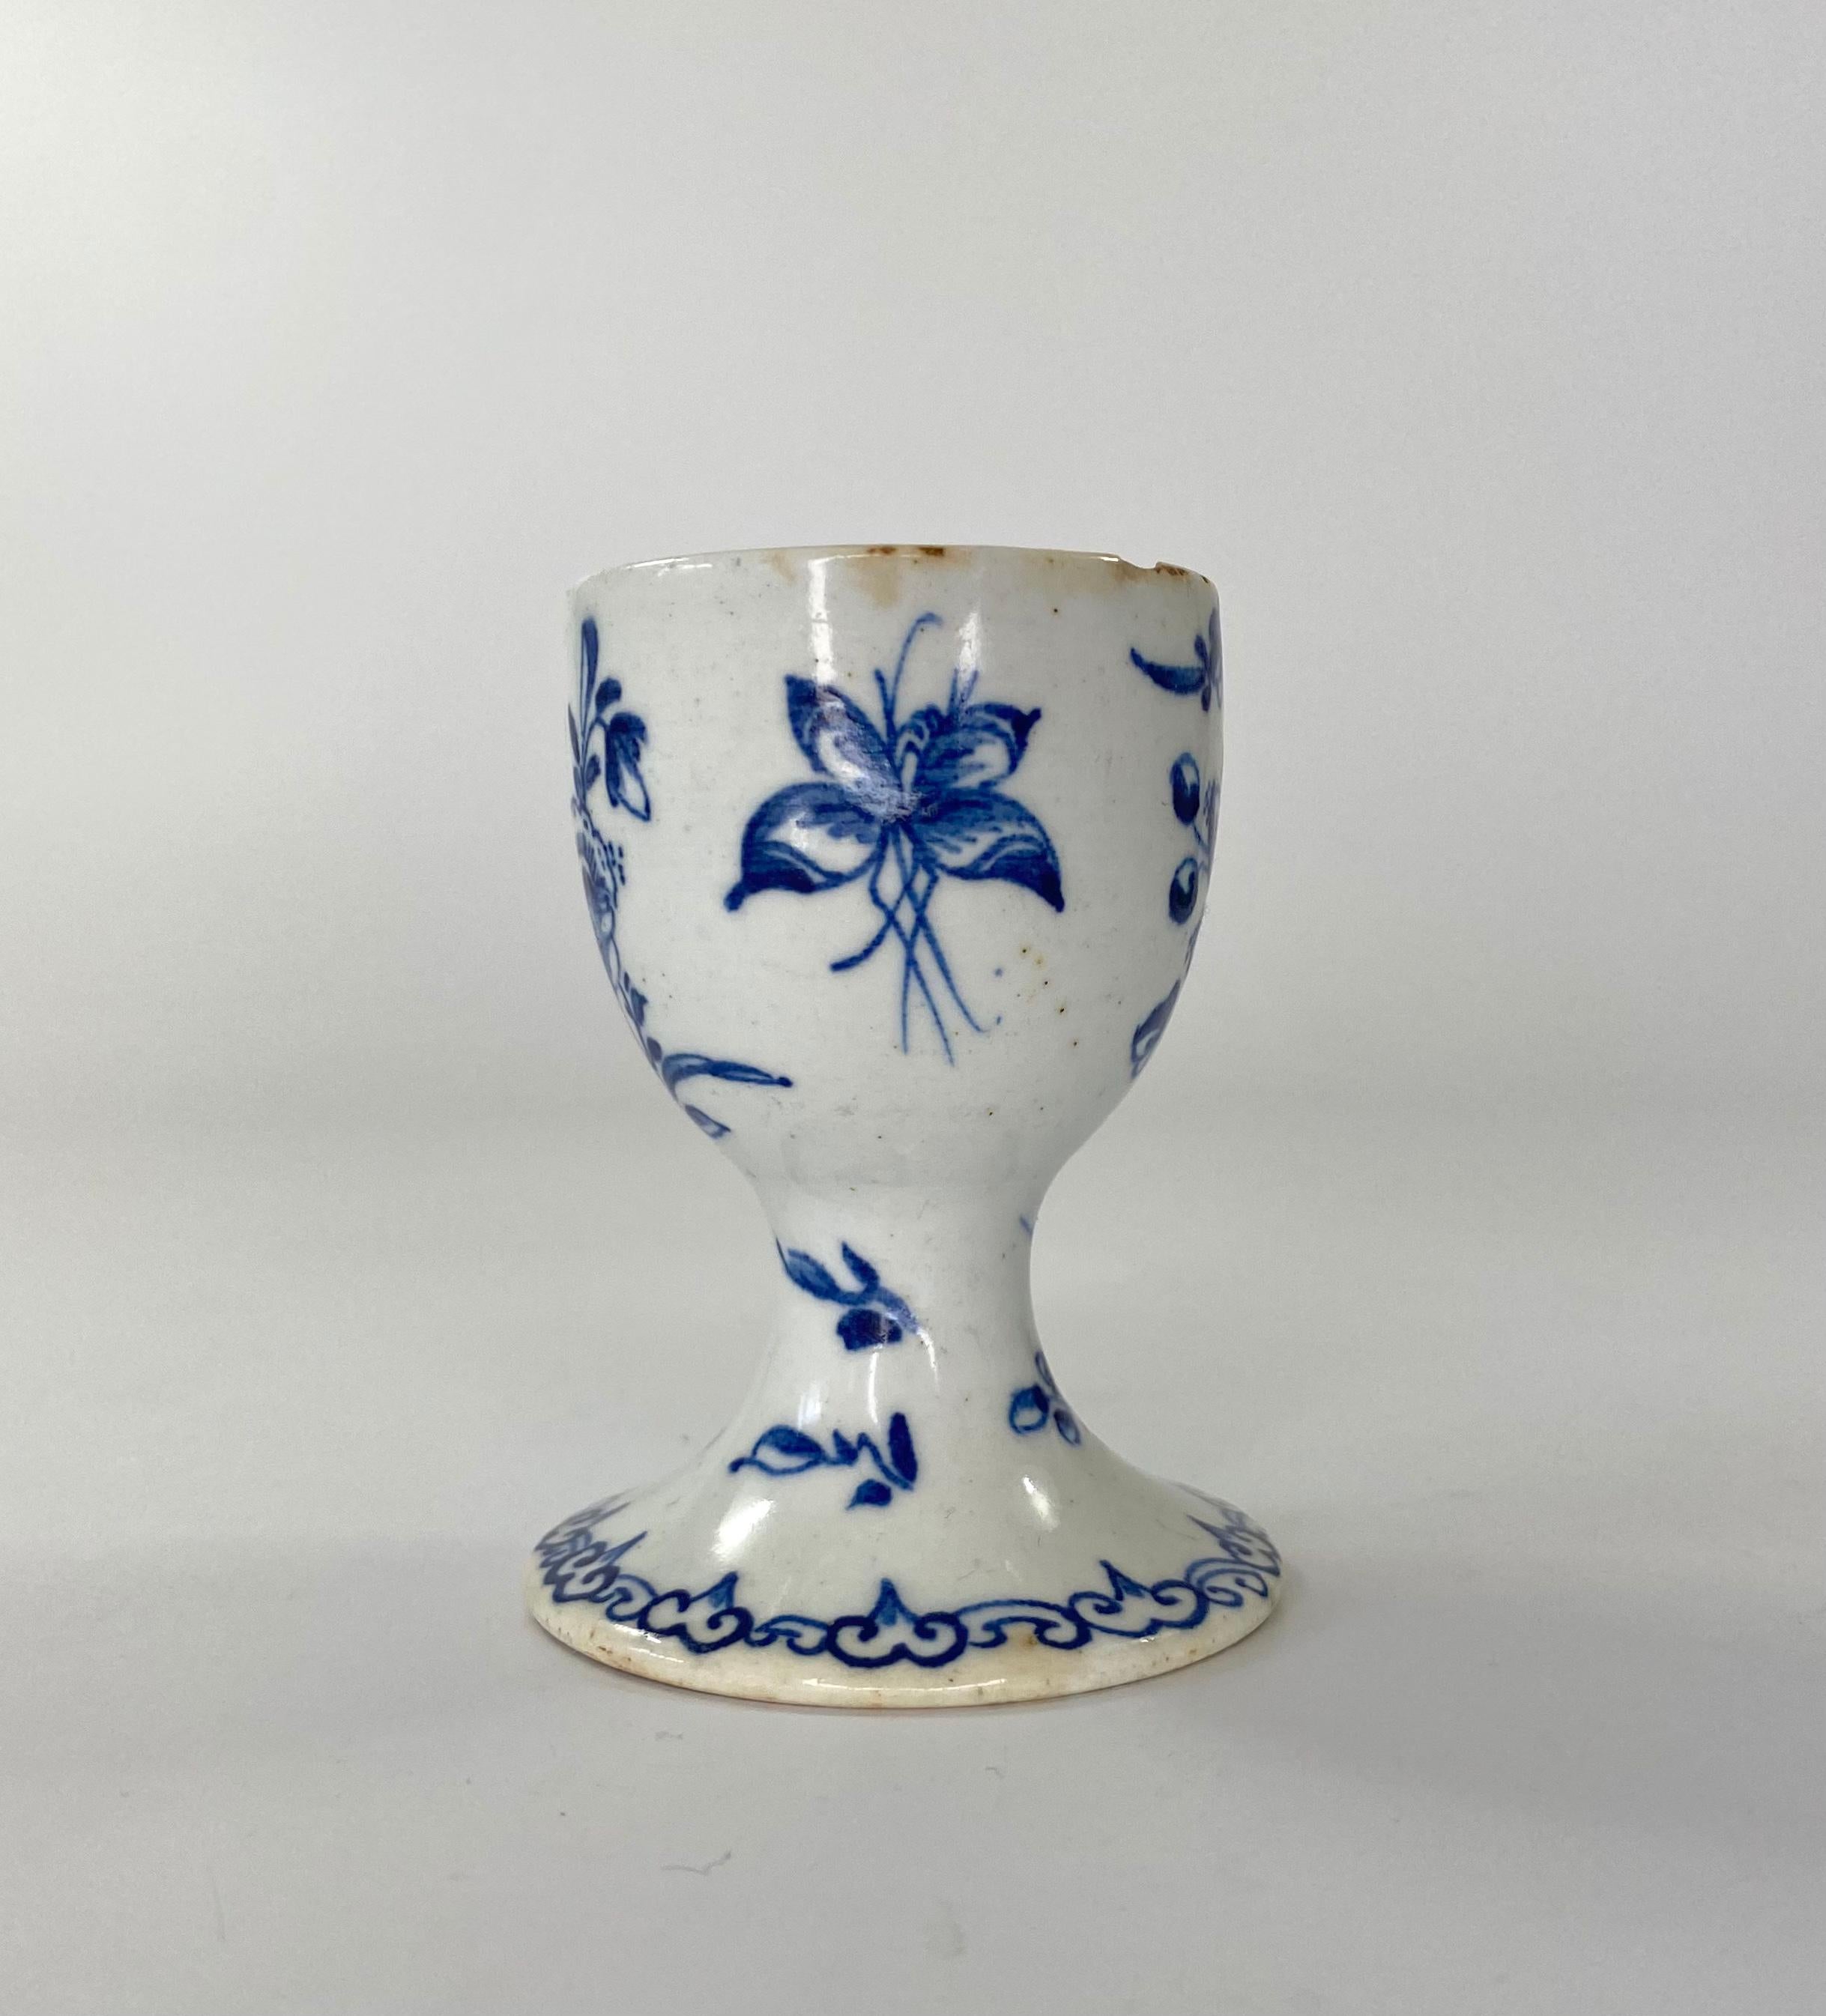 Rare bow porcelain egg cup, c. 1760. Hand painted in underglaze blue, with sprays of flowers, and moths.
The interior, with a cell diaper motif to the rim.
Medium: Porcelain.
Height: 7 cm, 2 3/4”.
Width: 5.3 cm, 2 1/8”.
Condition: Two chips to